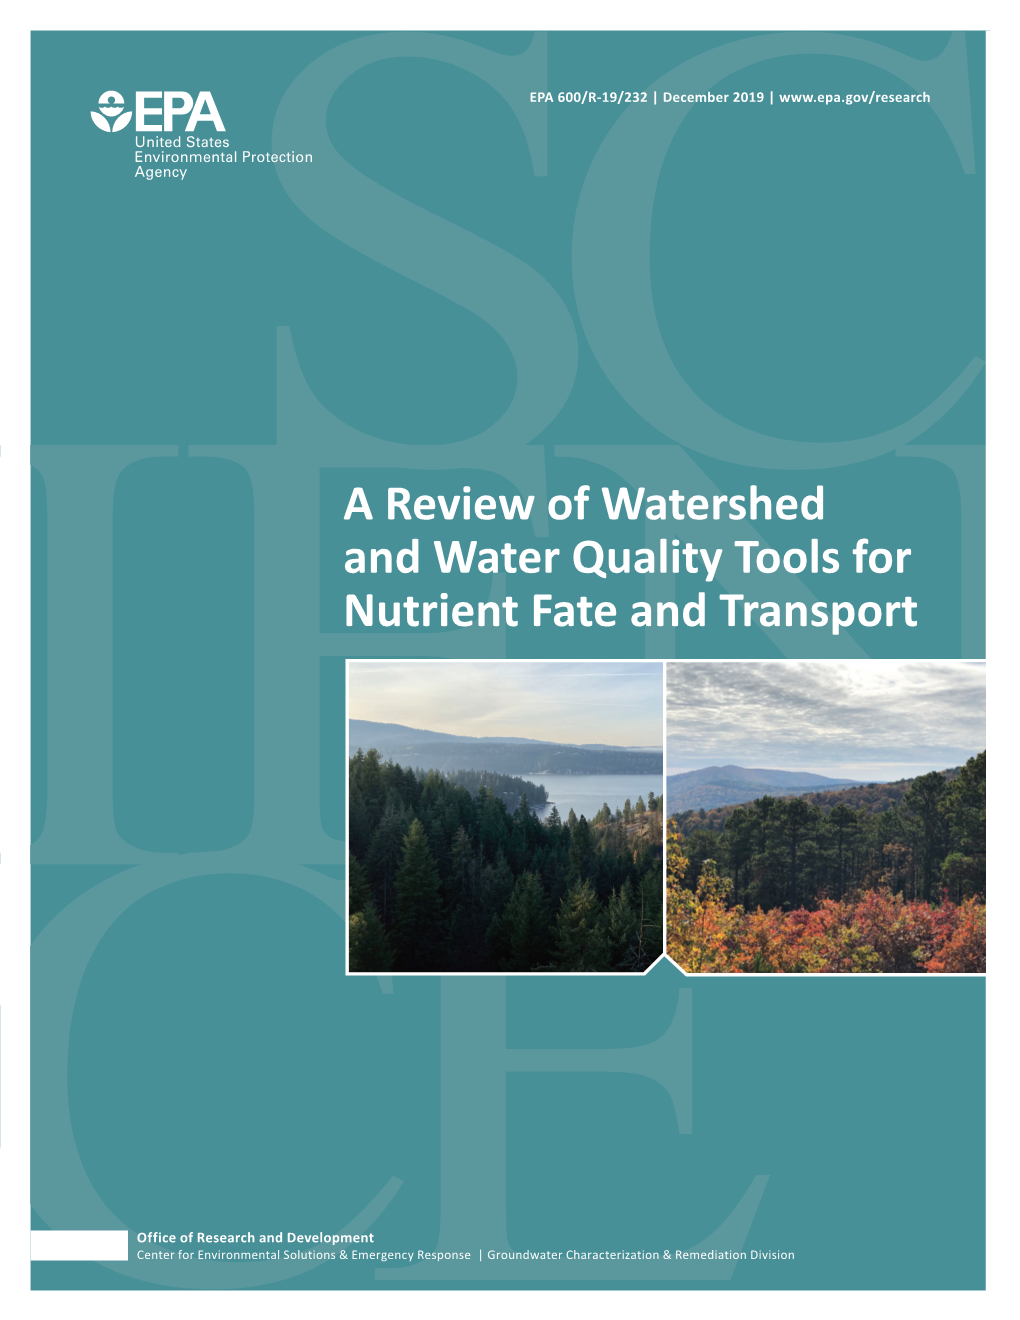 A Review of Watershed and Water Quality Tools for Nutrient Fate and Transport